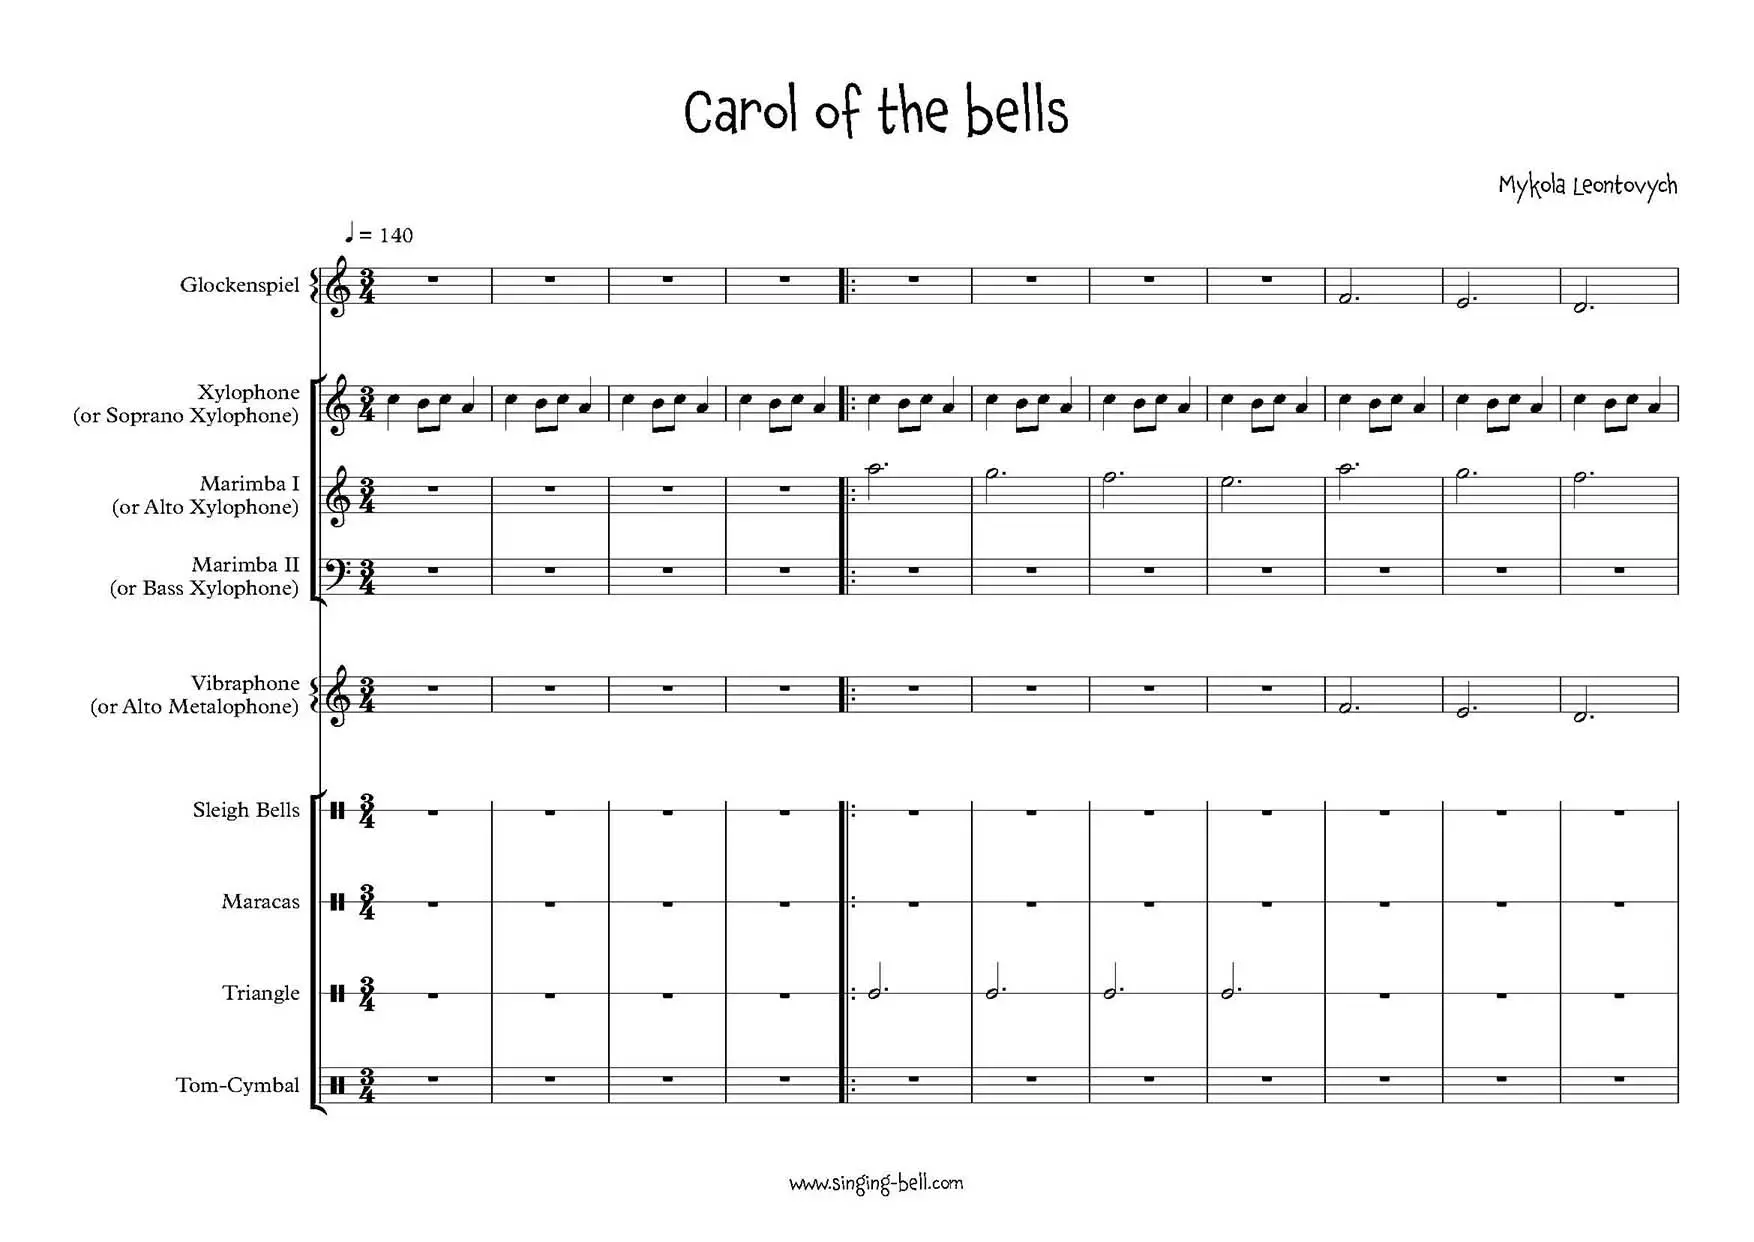 Carol of the bells mallet percussion ensemble orff arrangement sheet music page 1